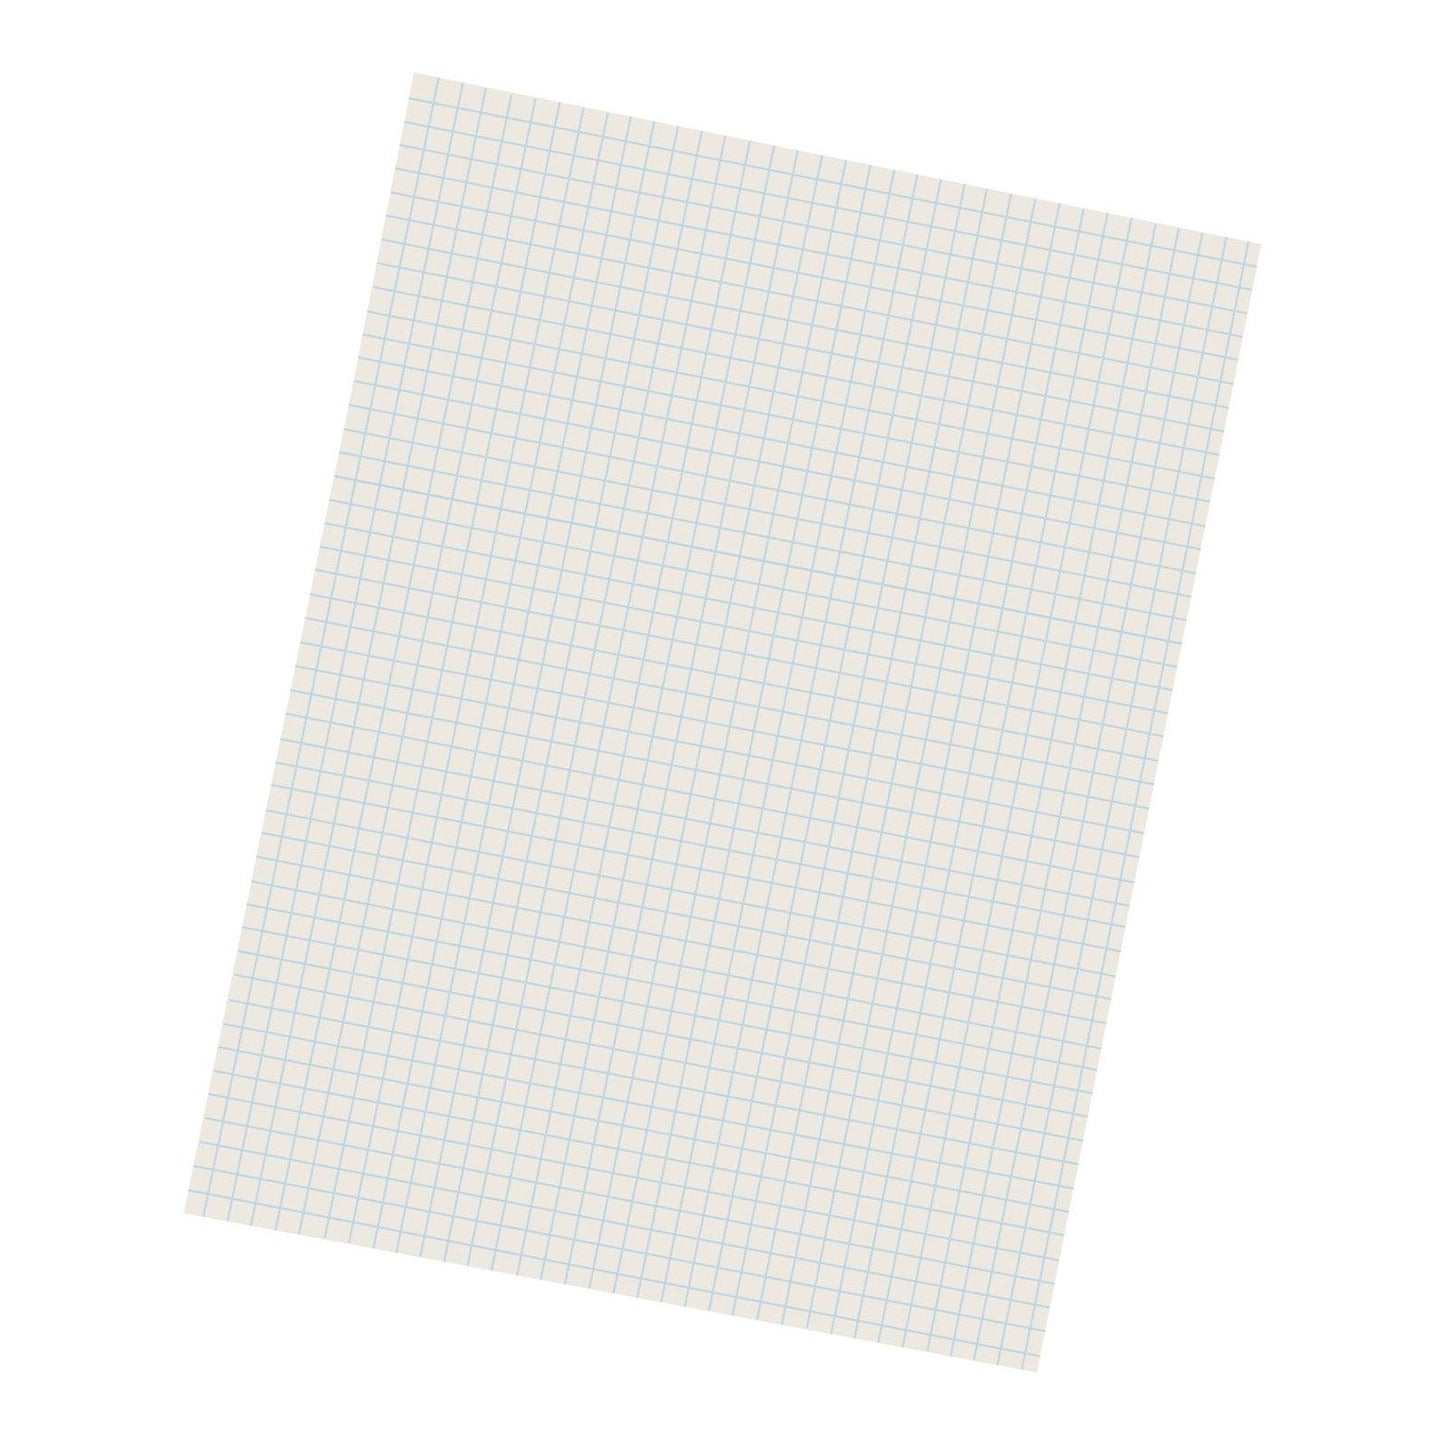 Grid Ruled Drawing Paper, White, 1/4" Quadrille Ruled, 9" x 12", 500 Sheets - Loomini